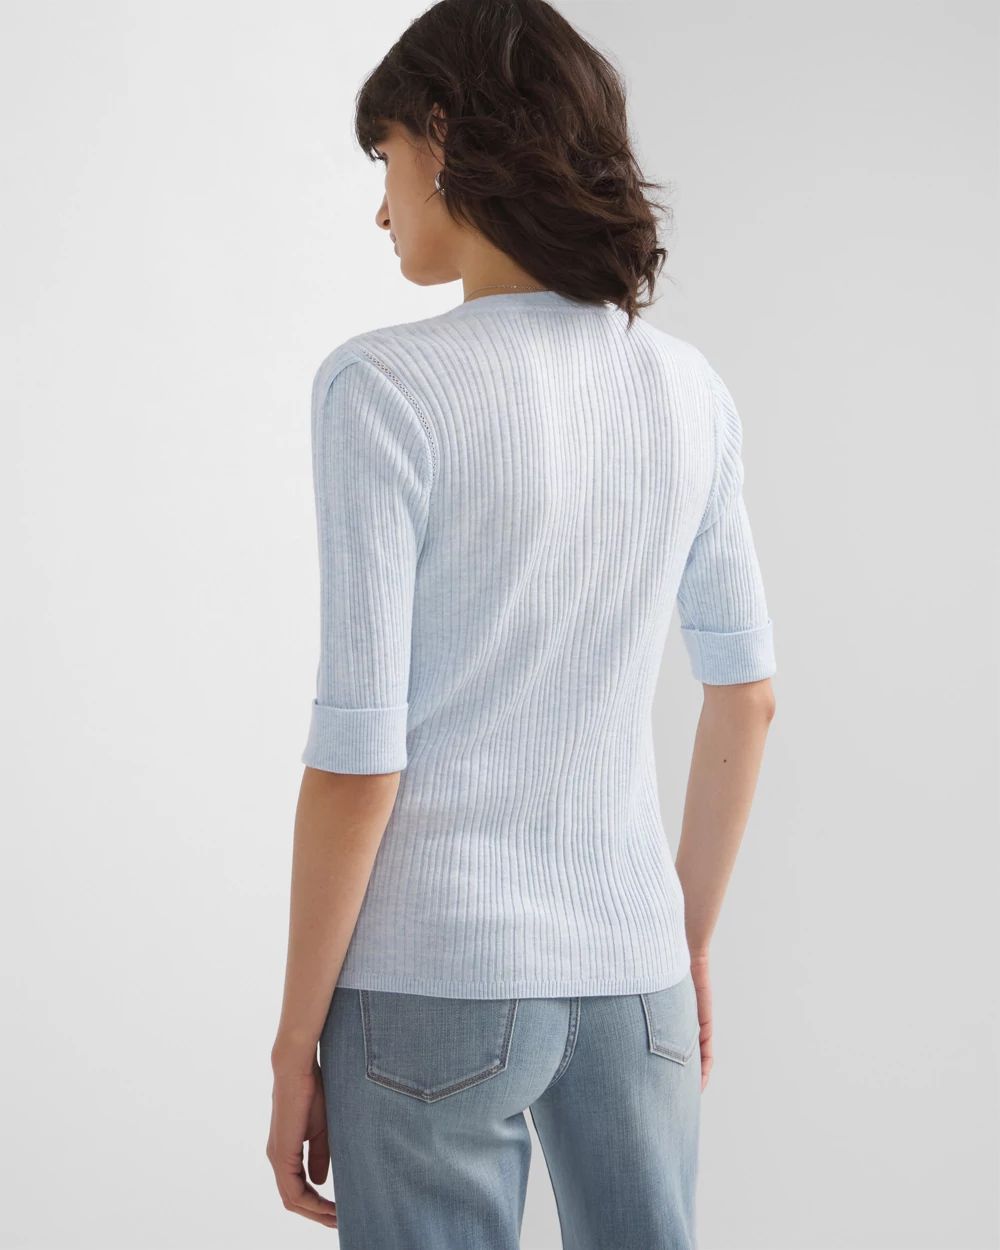 Cashmere Blend Elbow-Sleeve Henley Sweater click to view larger image.